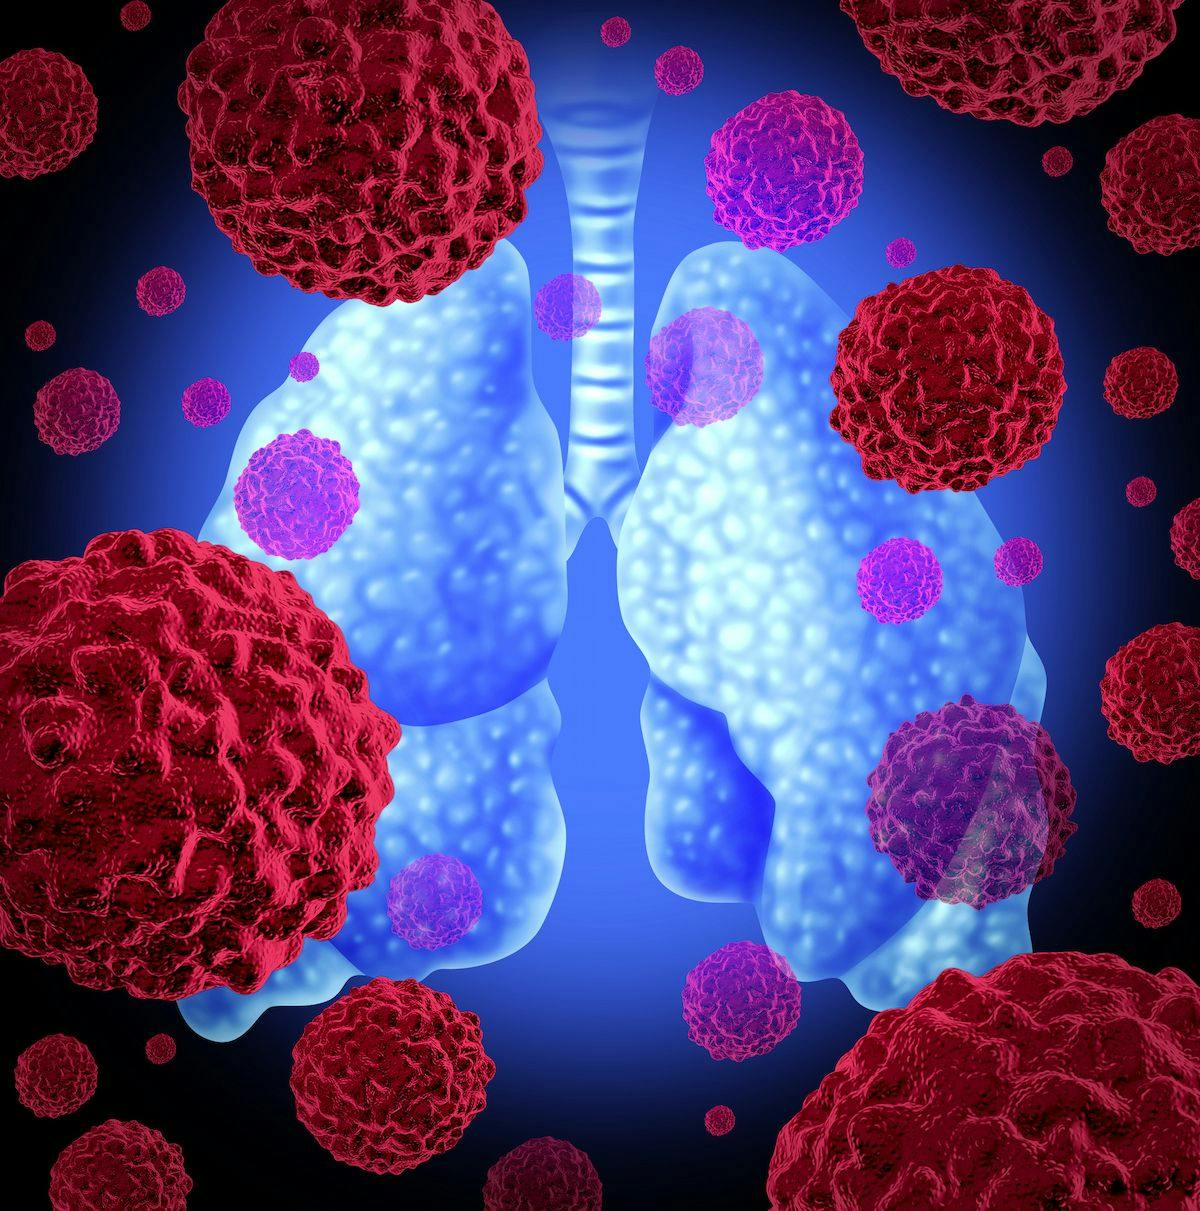 New findings from the phase 3 ADAURA trial “provide powerful evidence” of osimertinib’s potential to extend the lives of patients with early-stage, EGFR-mutant non–small cell lung cancer, according to an expert from Yale Cancer Center.